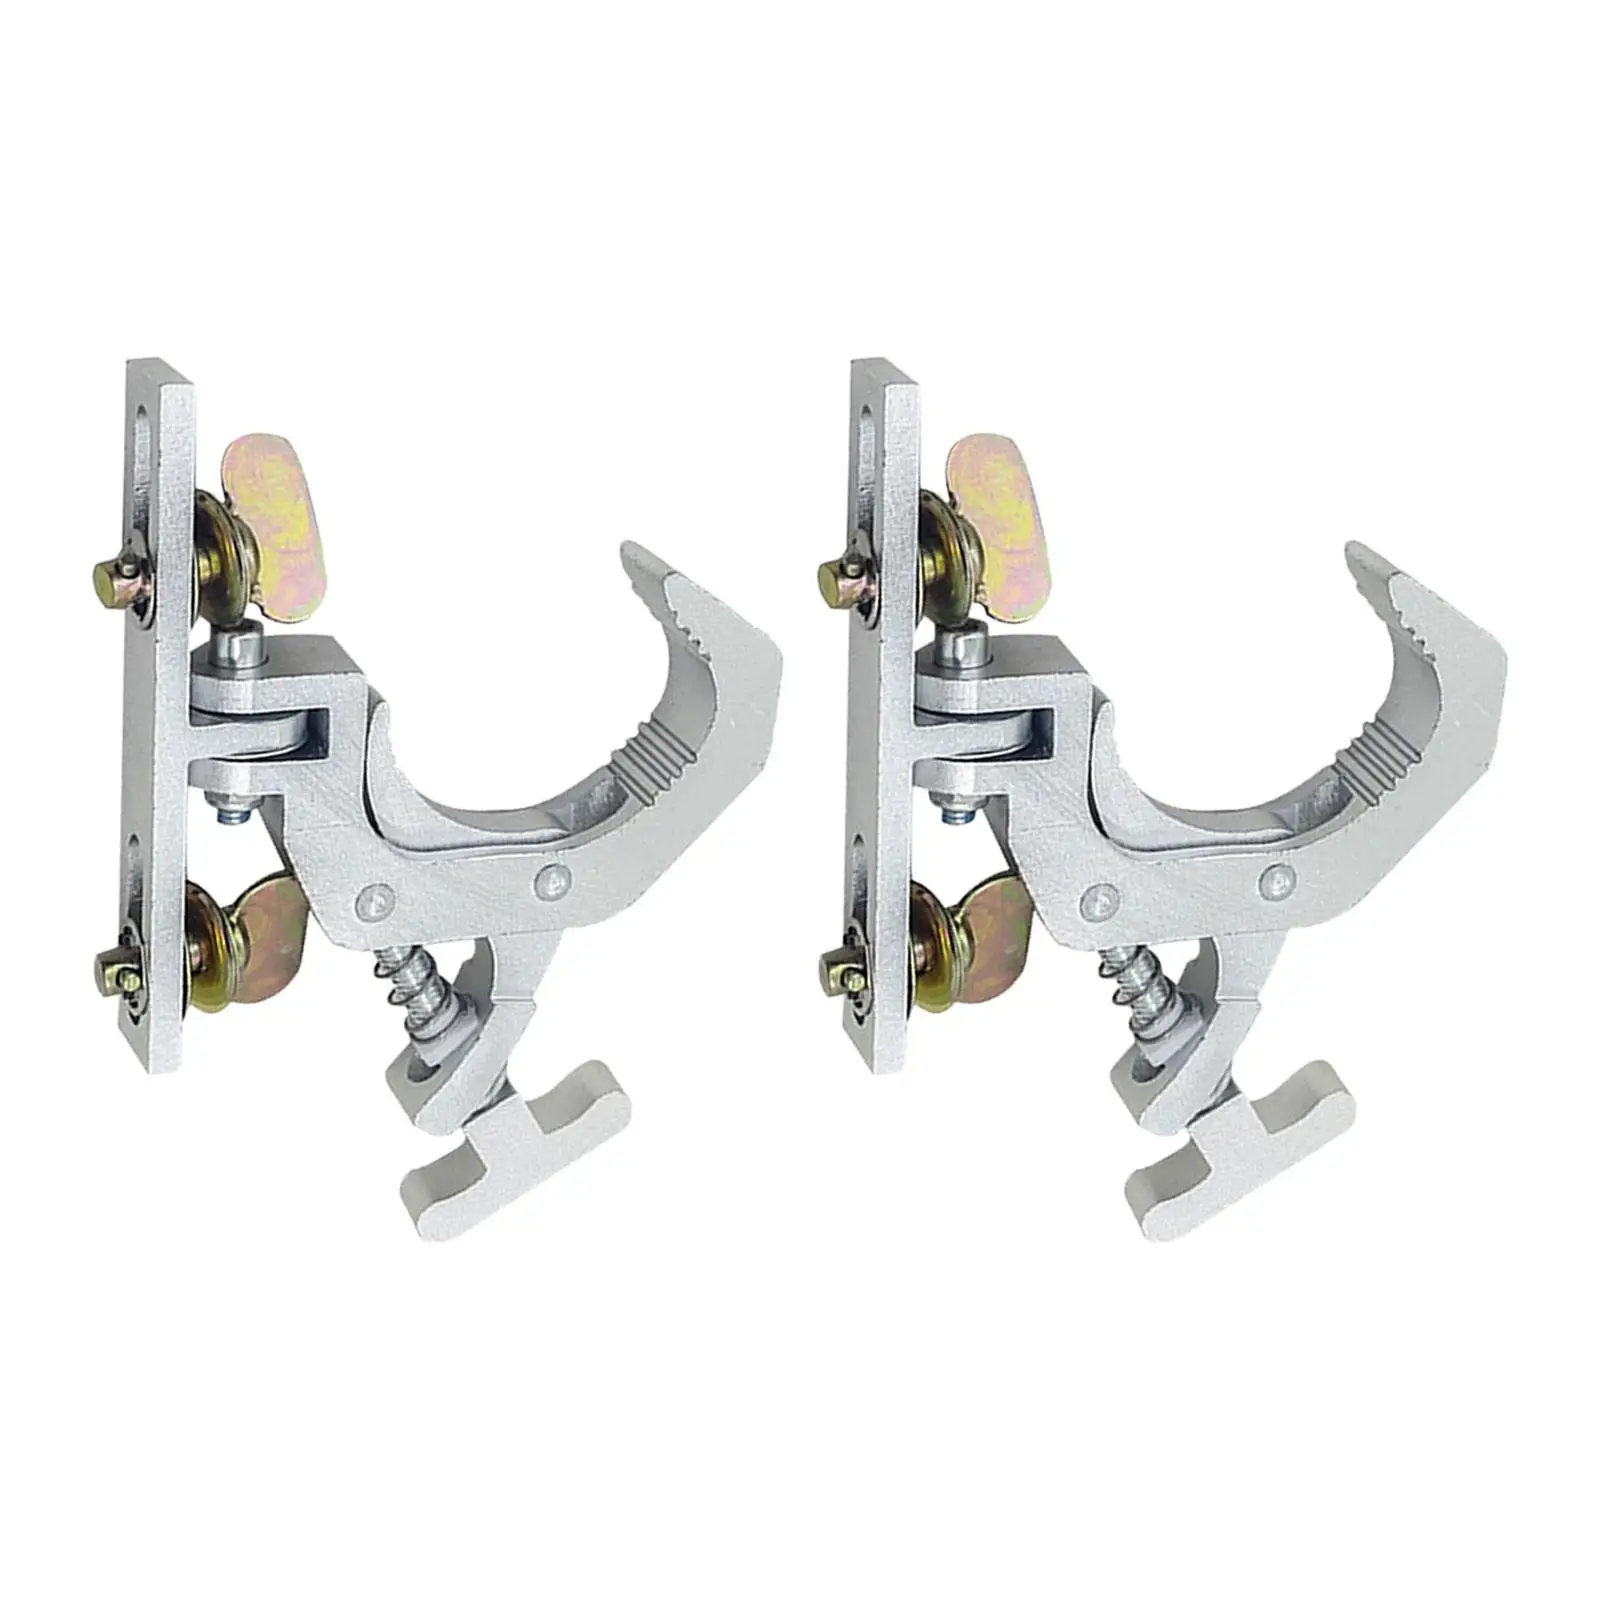 2x Lighting Clamp Event Aluminum Alloy Stage Exhibition Stage Light Clamp